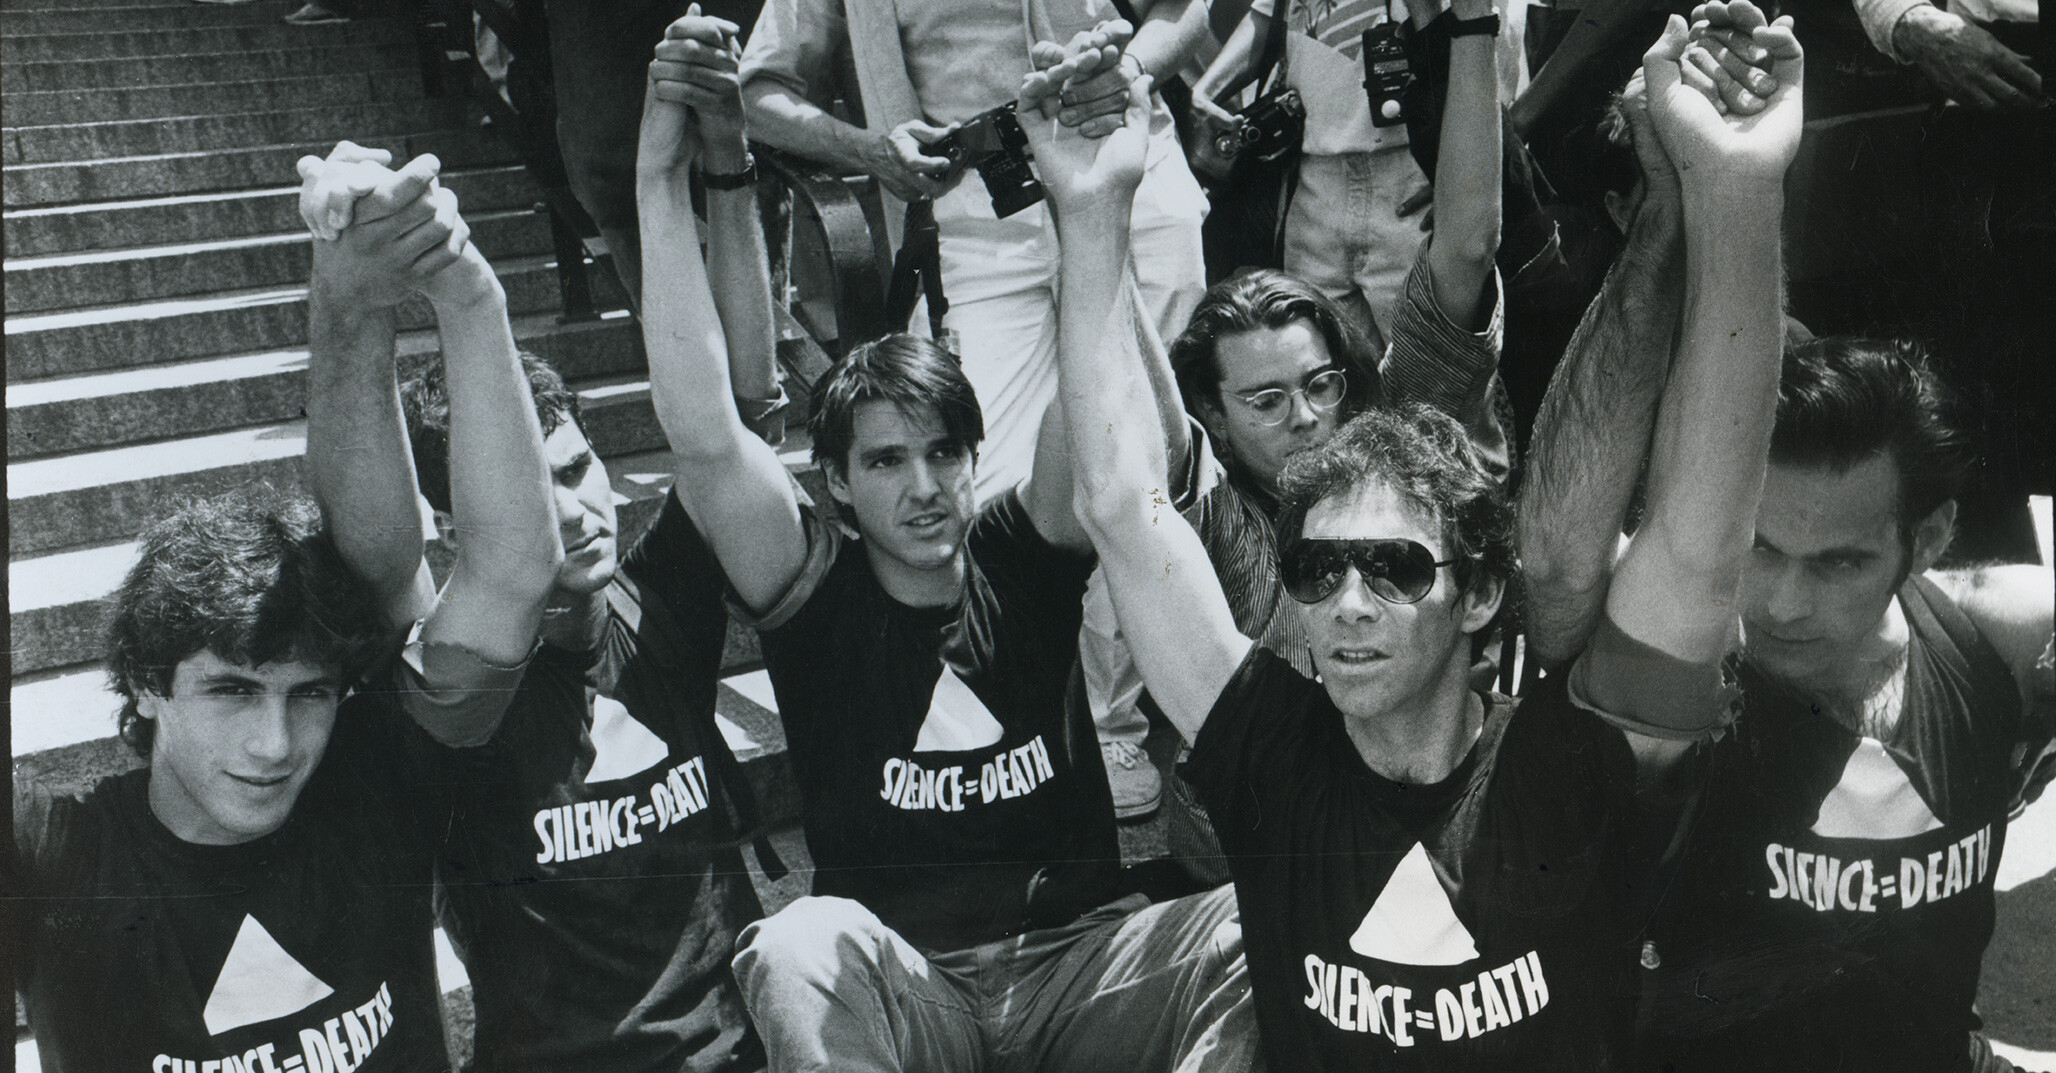 A detail from a photo by Donna Binder of the ACT UP Demo Federal Plaza NYC June 30, 1987 From left: Steve Gendon, Mark Aurigemma, Douglas Montgomery, Charles Stinson, Frank O’Dowd, Avram Finkelstein.